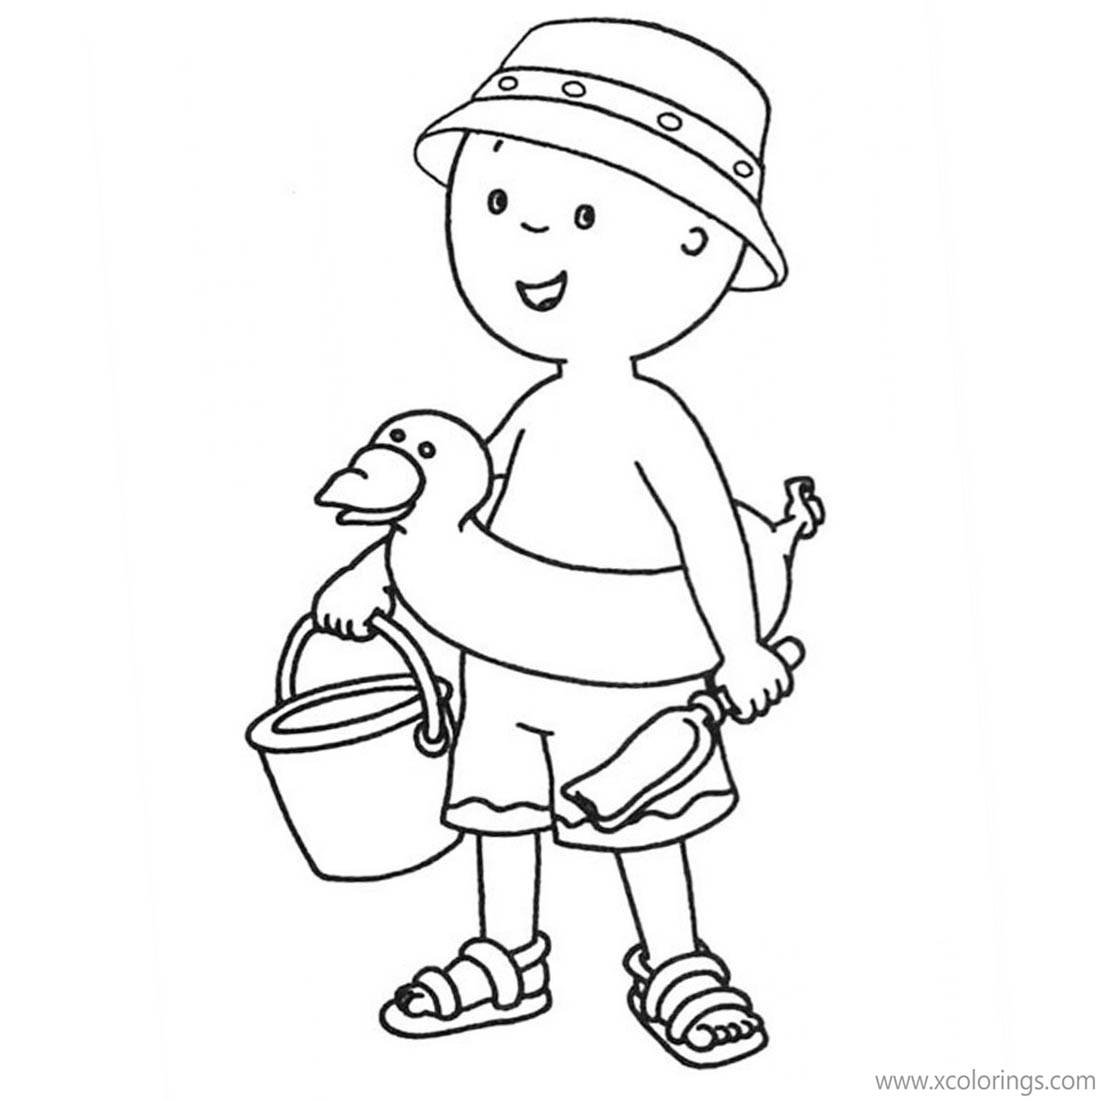 Free Caillou Coloring Pages Go to Play Sand printable